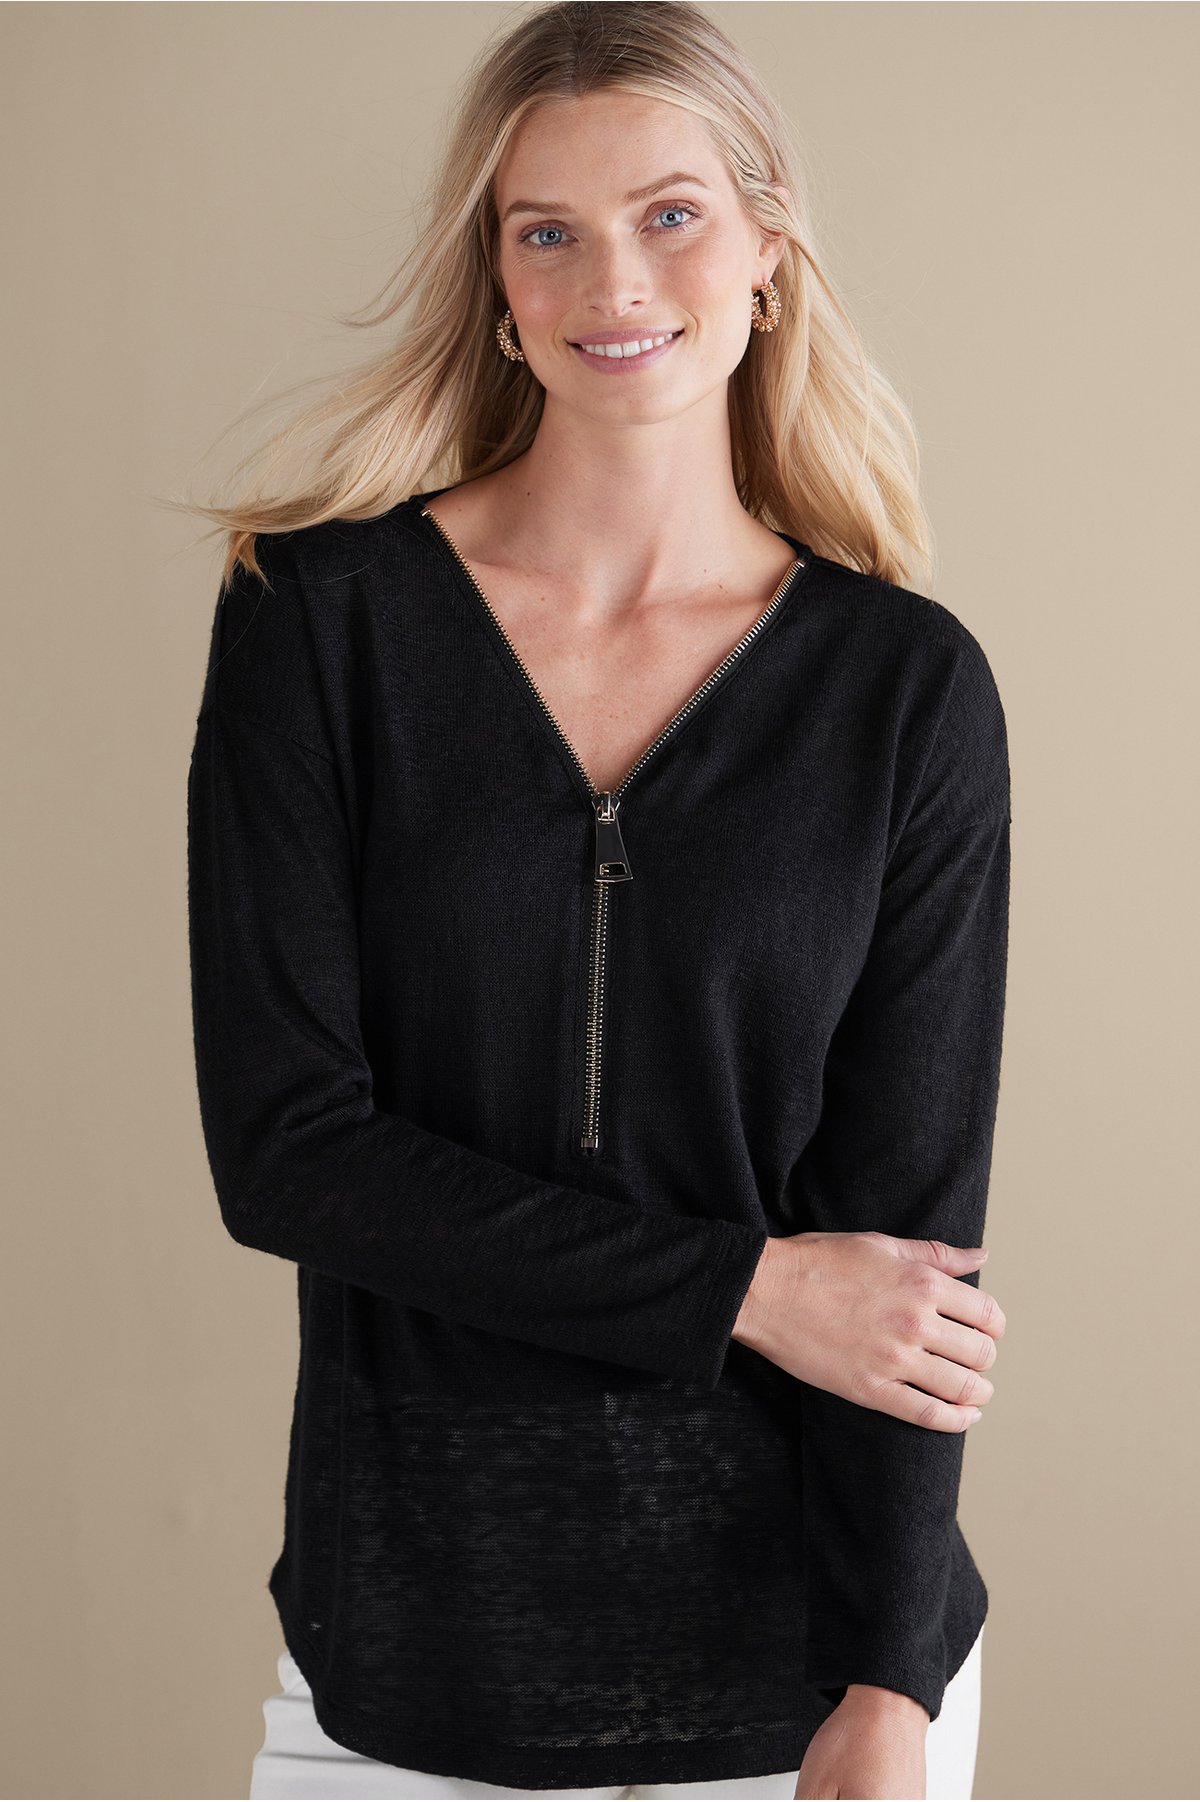 Women's Valentina Zip Sweater by Soft Surroundings, in Black size XS (2-4)